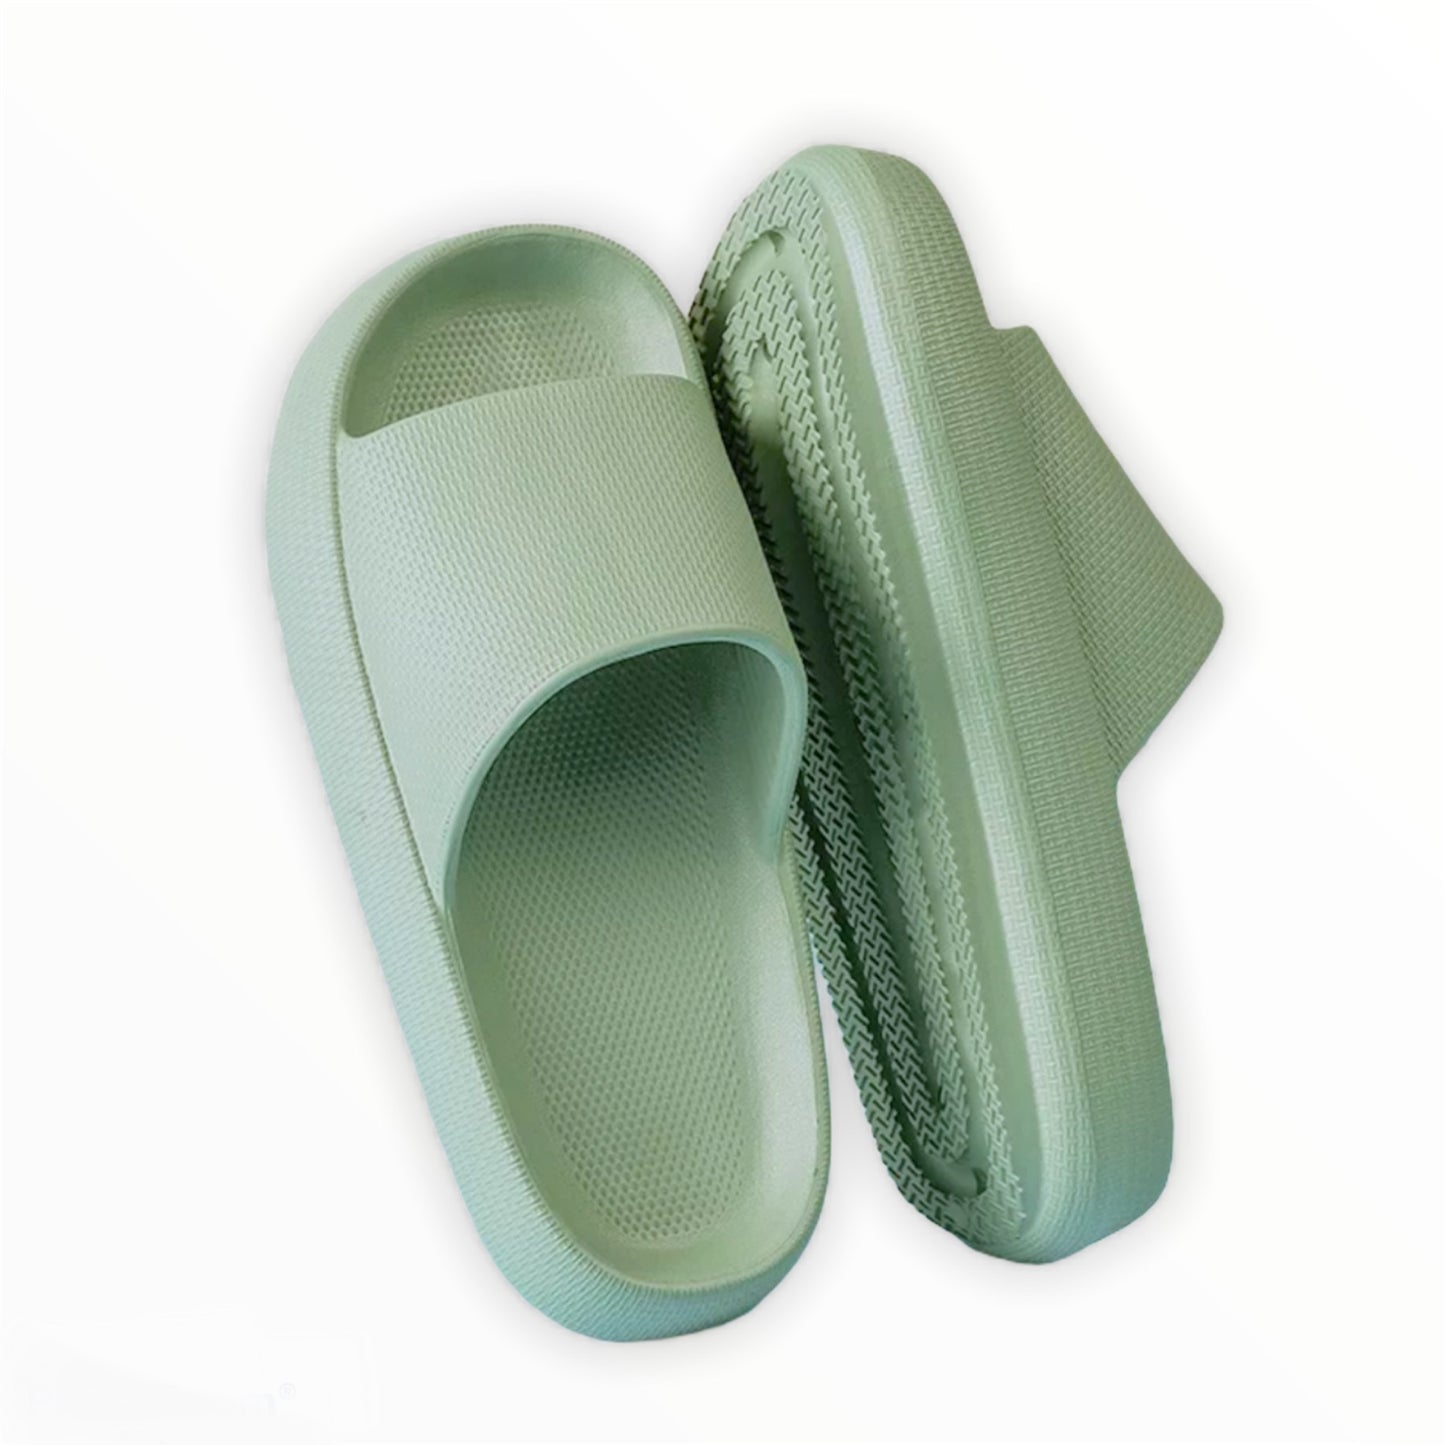 Anti-slip slippers, arch support sandals, washable and waterproof slippers, thick sole slippers. 